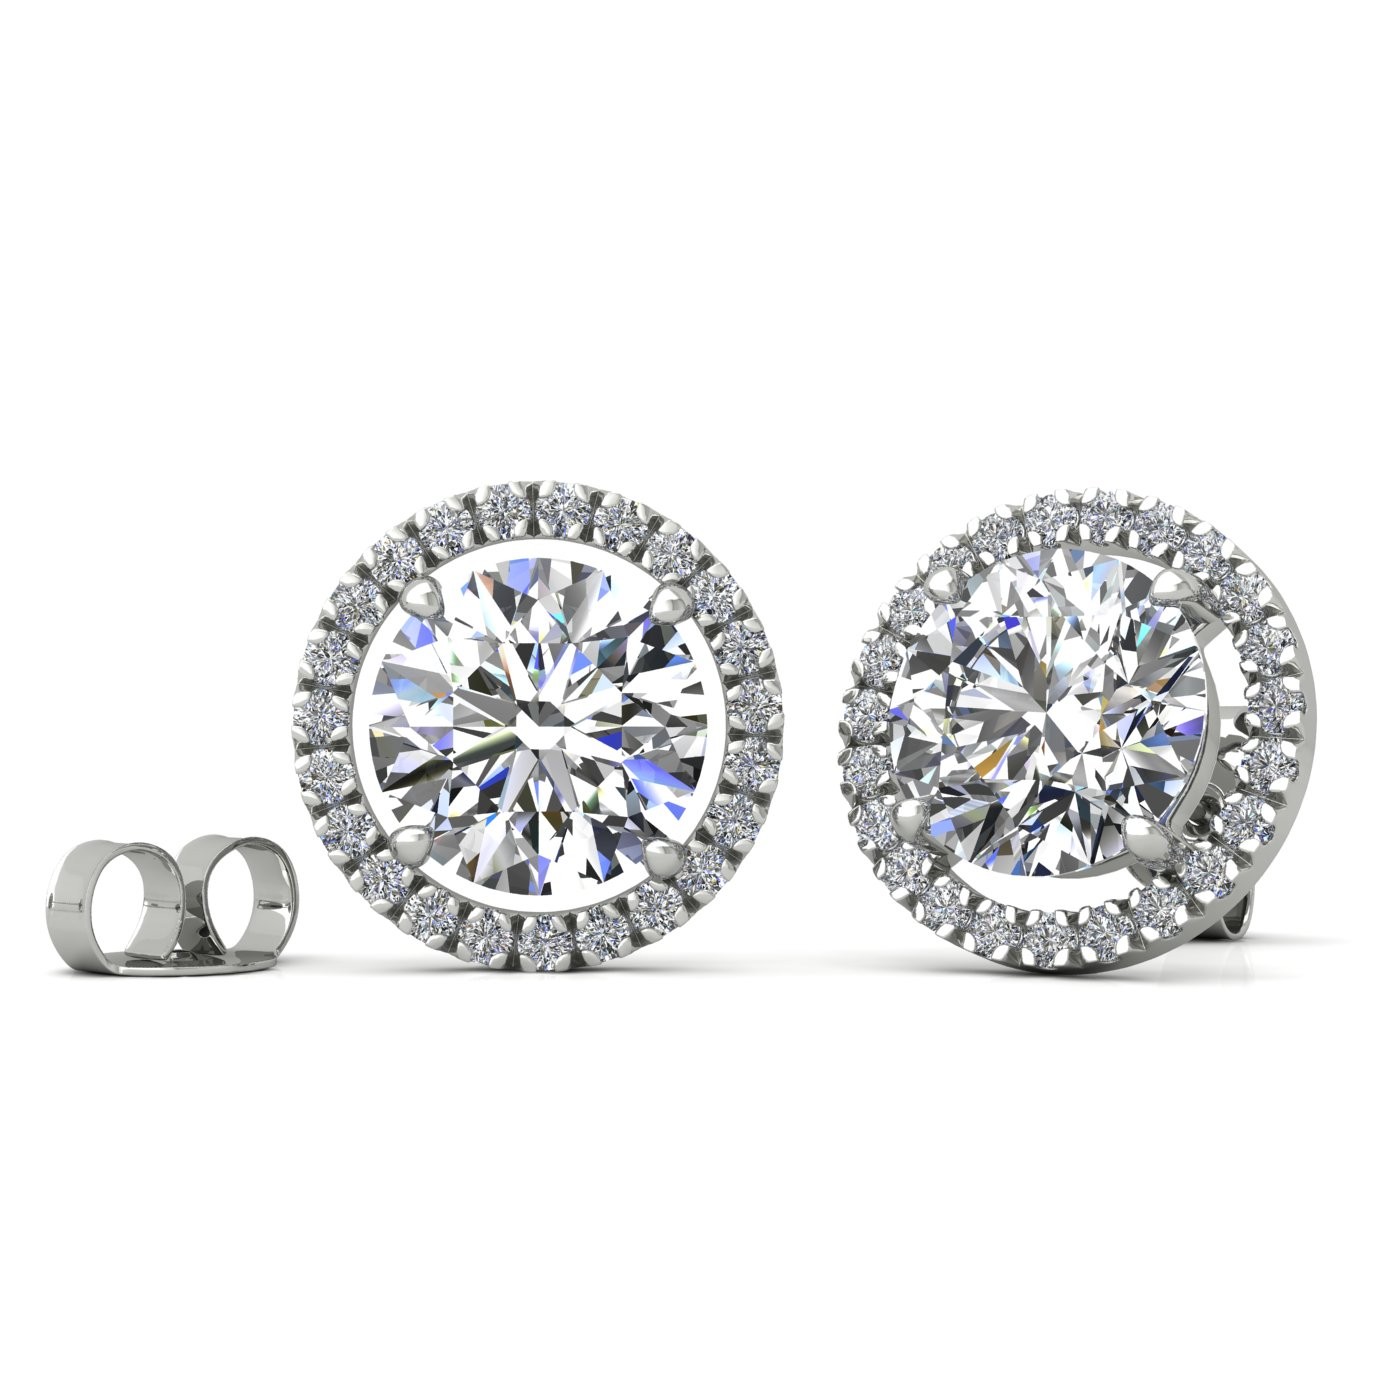 18k white gold  0,3 ct each (0,6 tcw) 4 prongs round brilliant cut halo diamond earring studs Photos & images